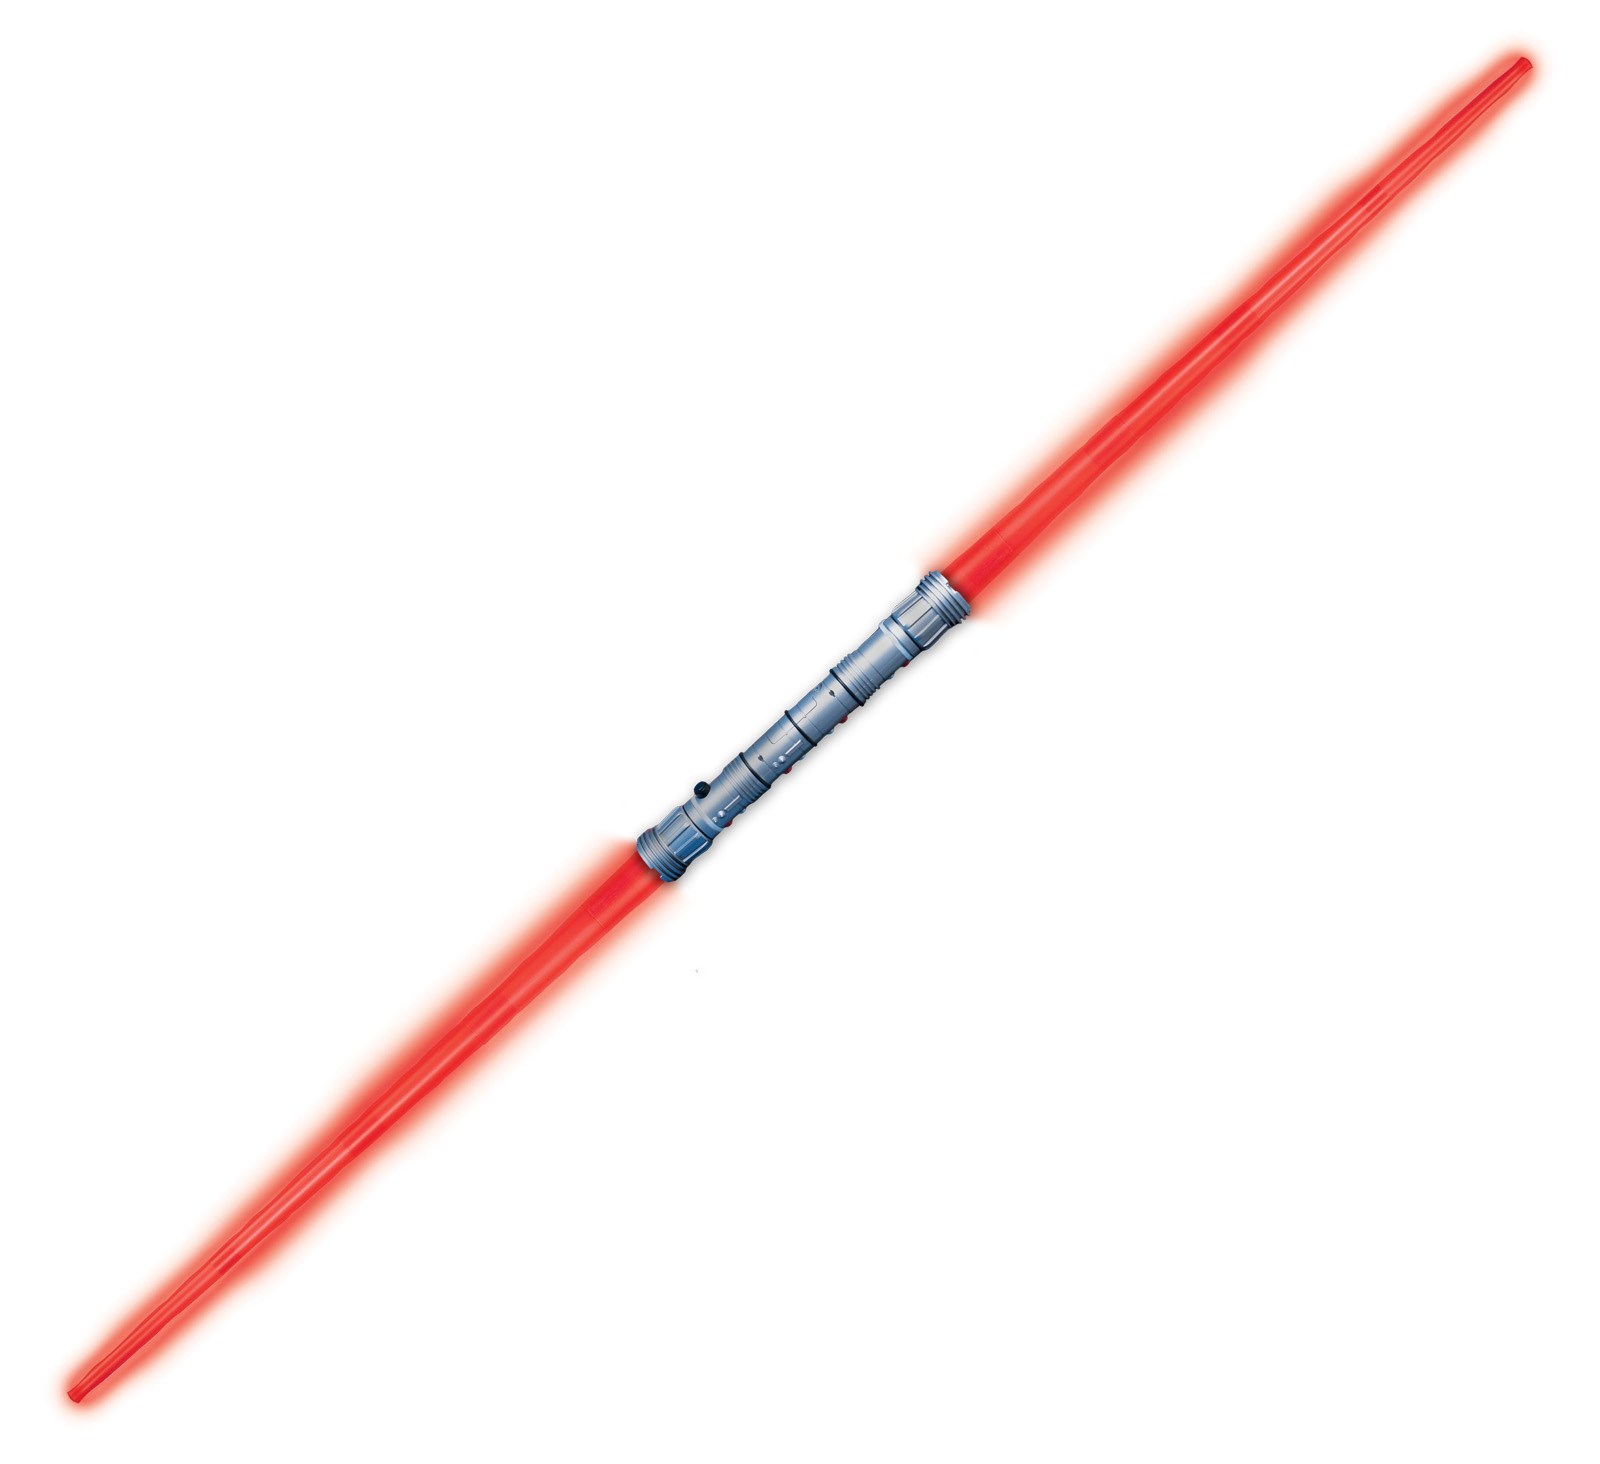 Star Wars Sith Lord Lightsaber